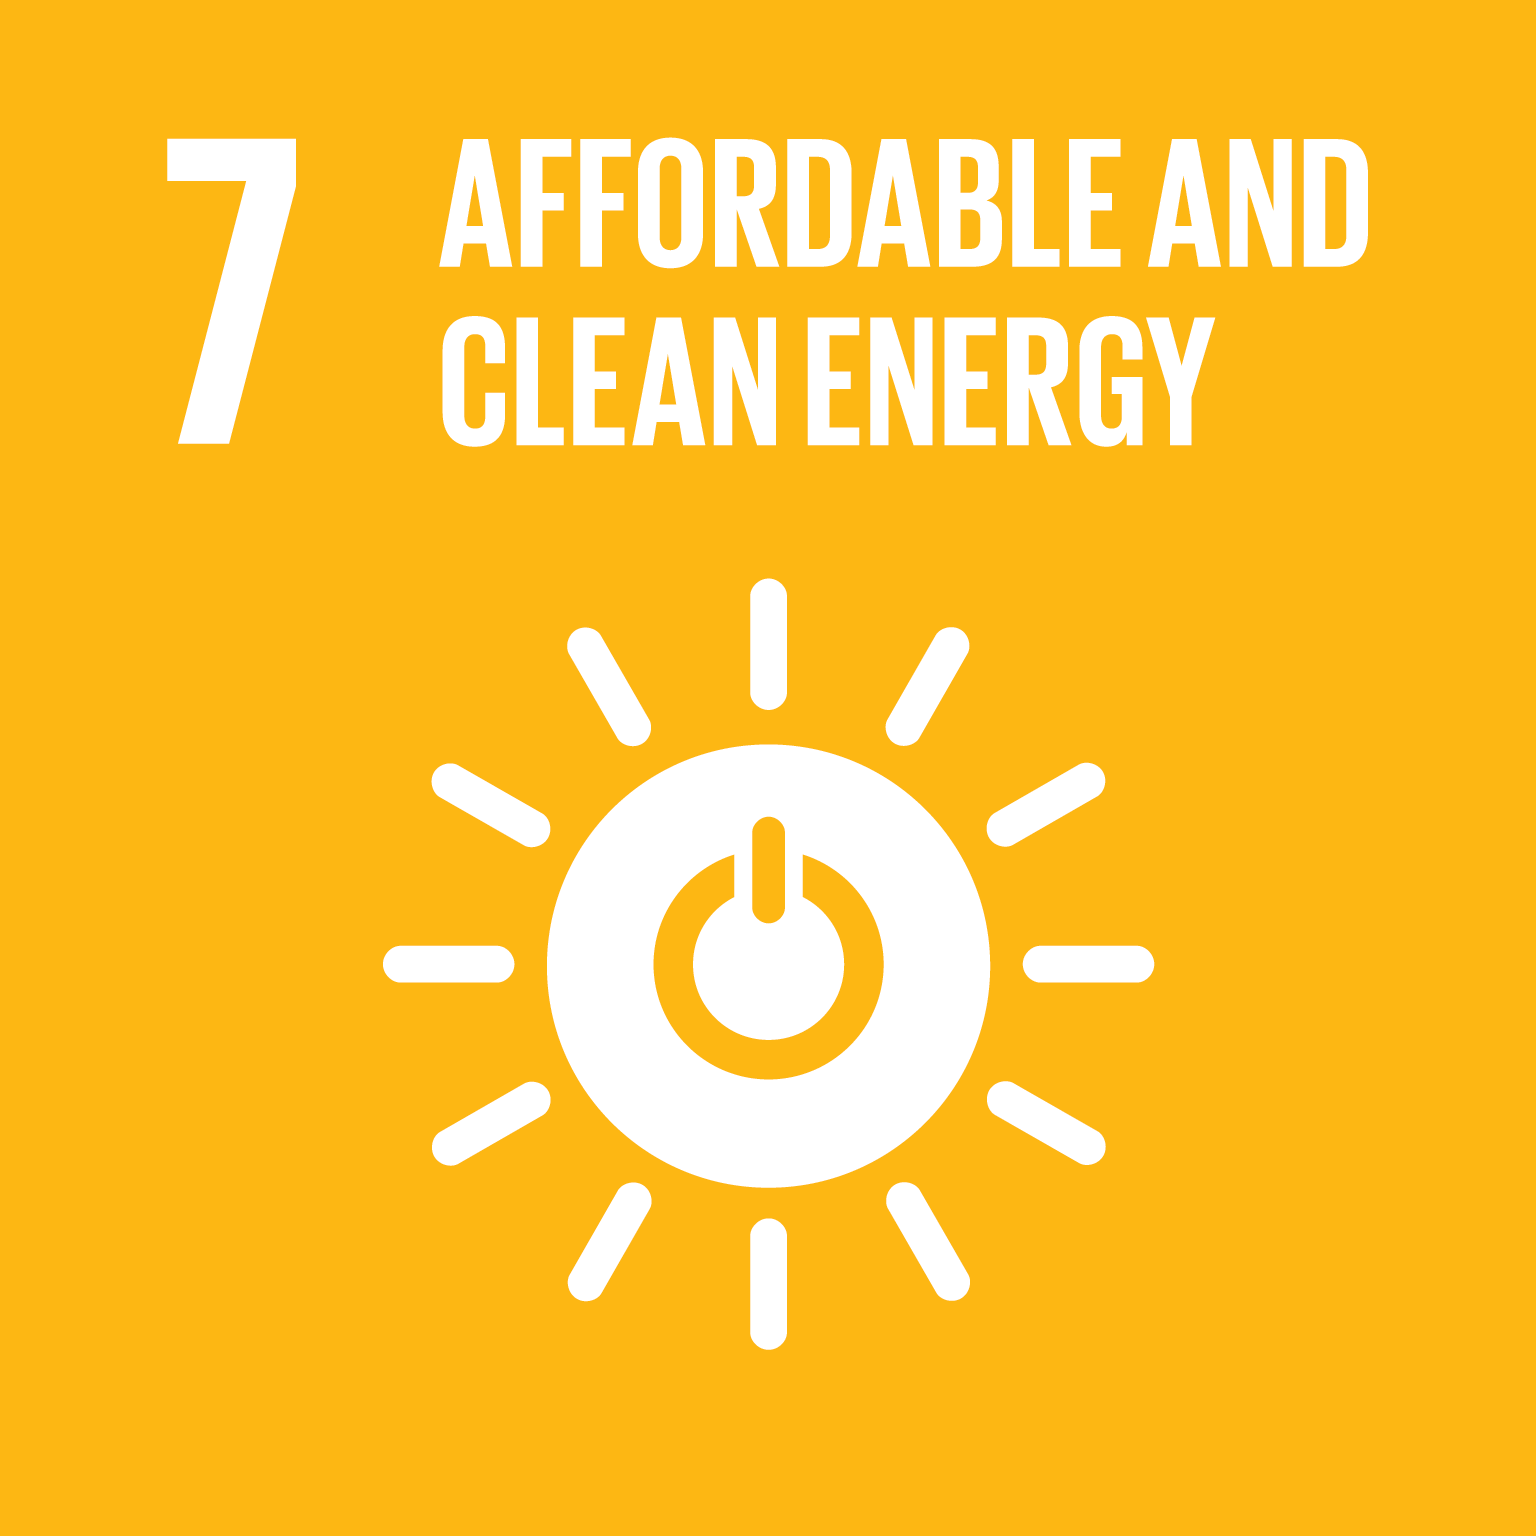 Goal 7 - affordable and clean energy